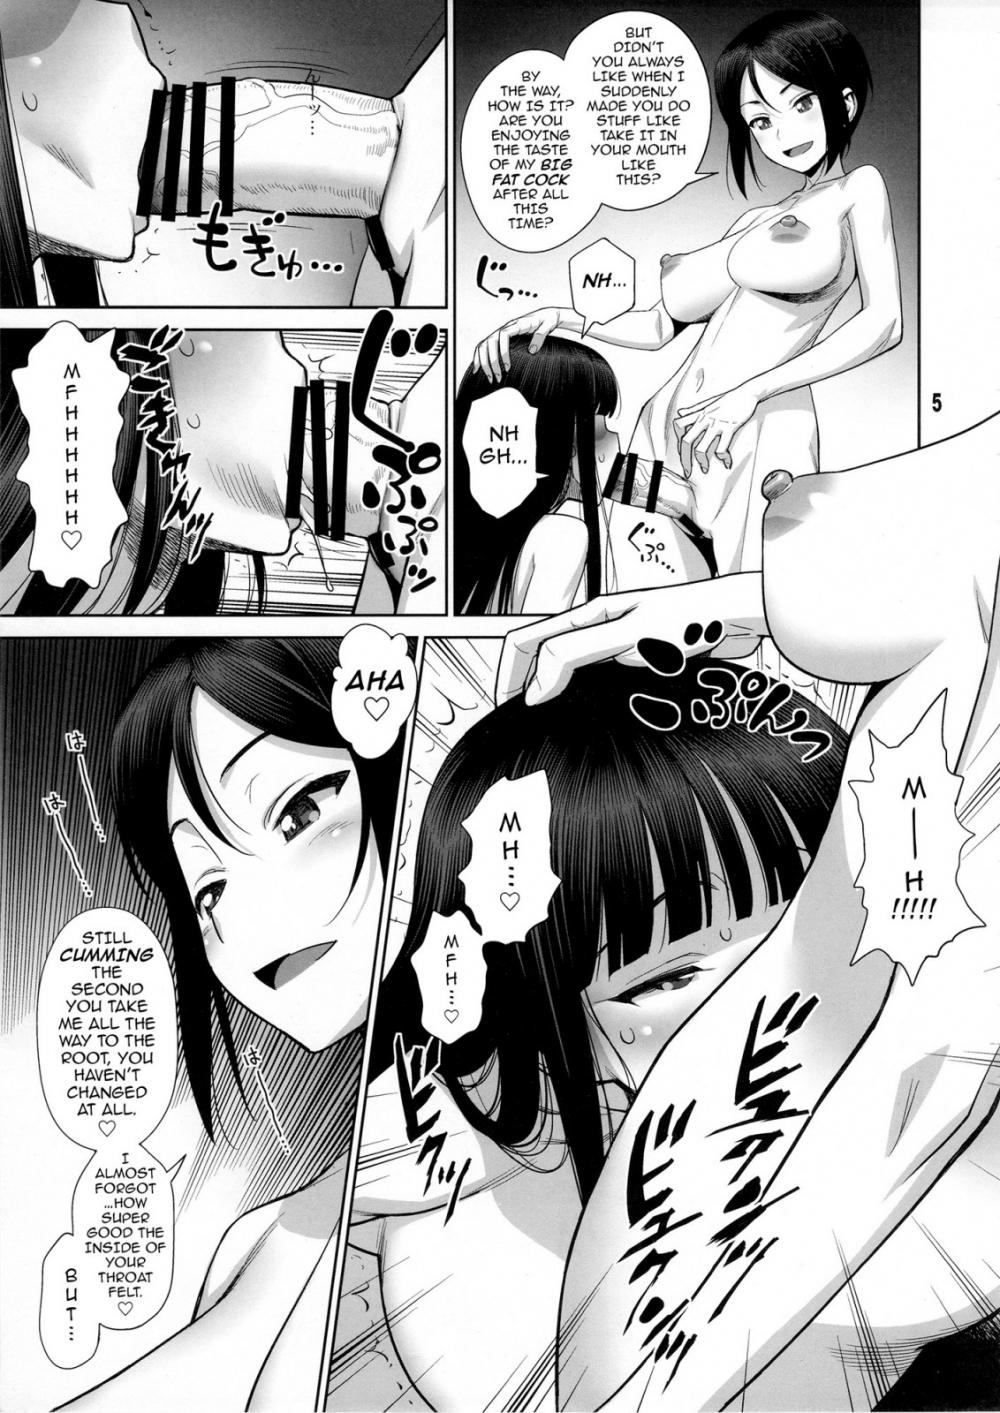 Hentai Manga Comic-Sliding in and Pounding it is 120% Effective-Read-4